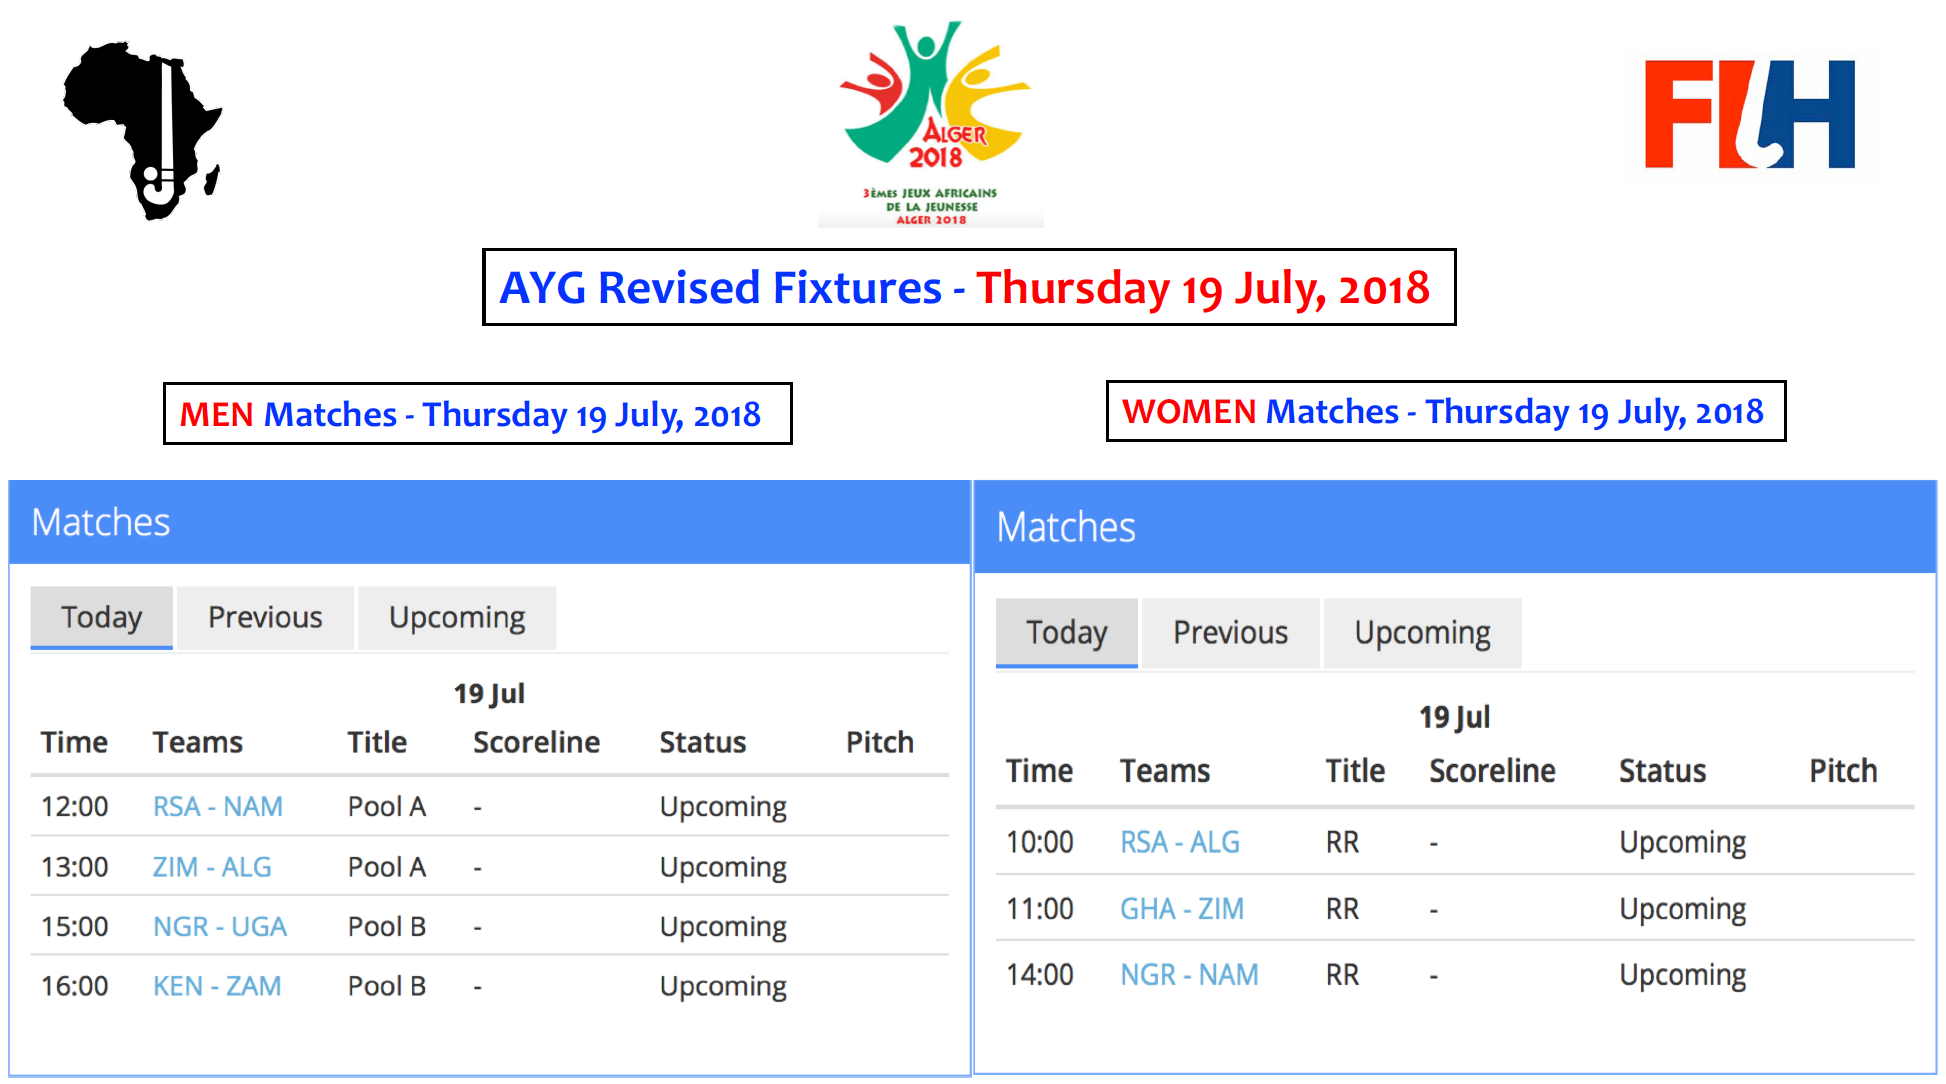 AYG Revised Fixtures - Thursday 19 July, 2018